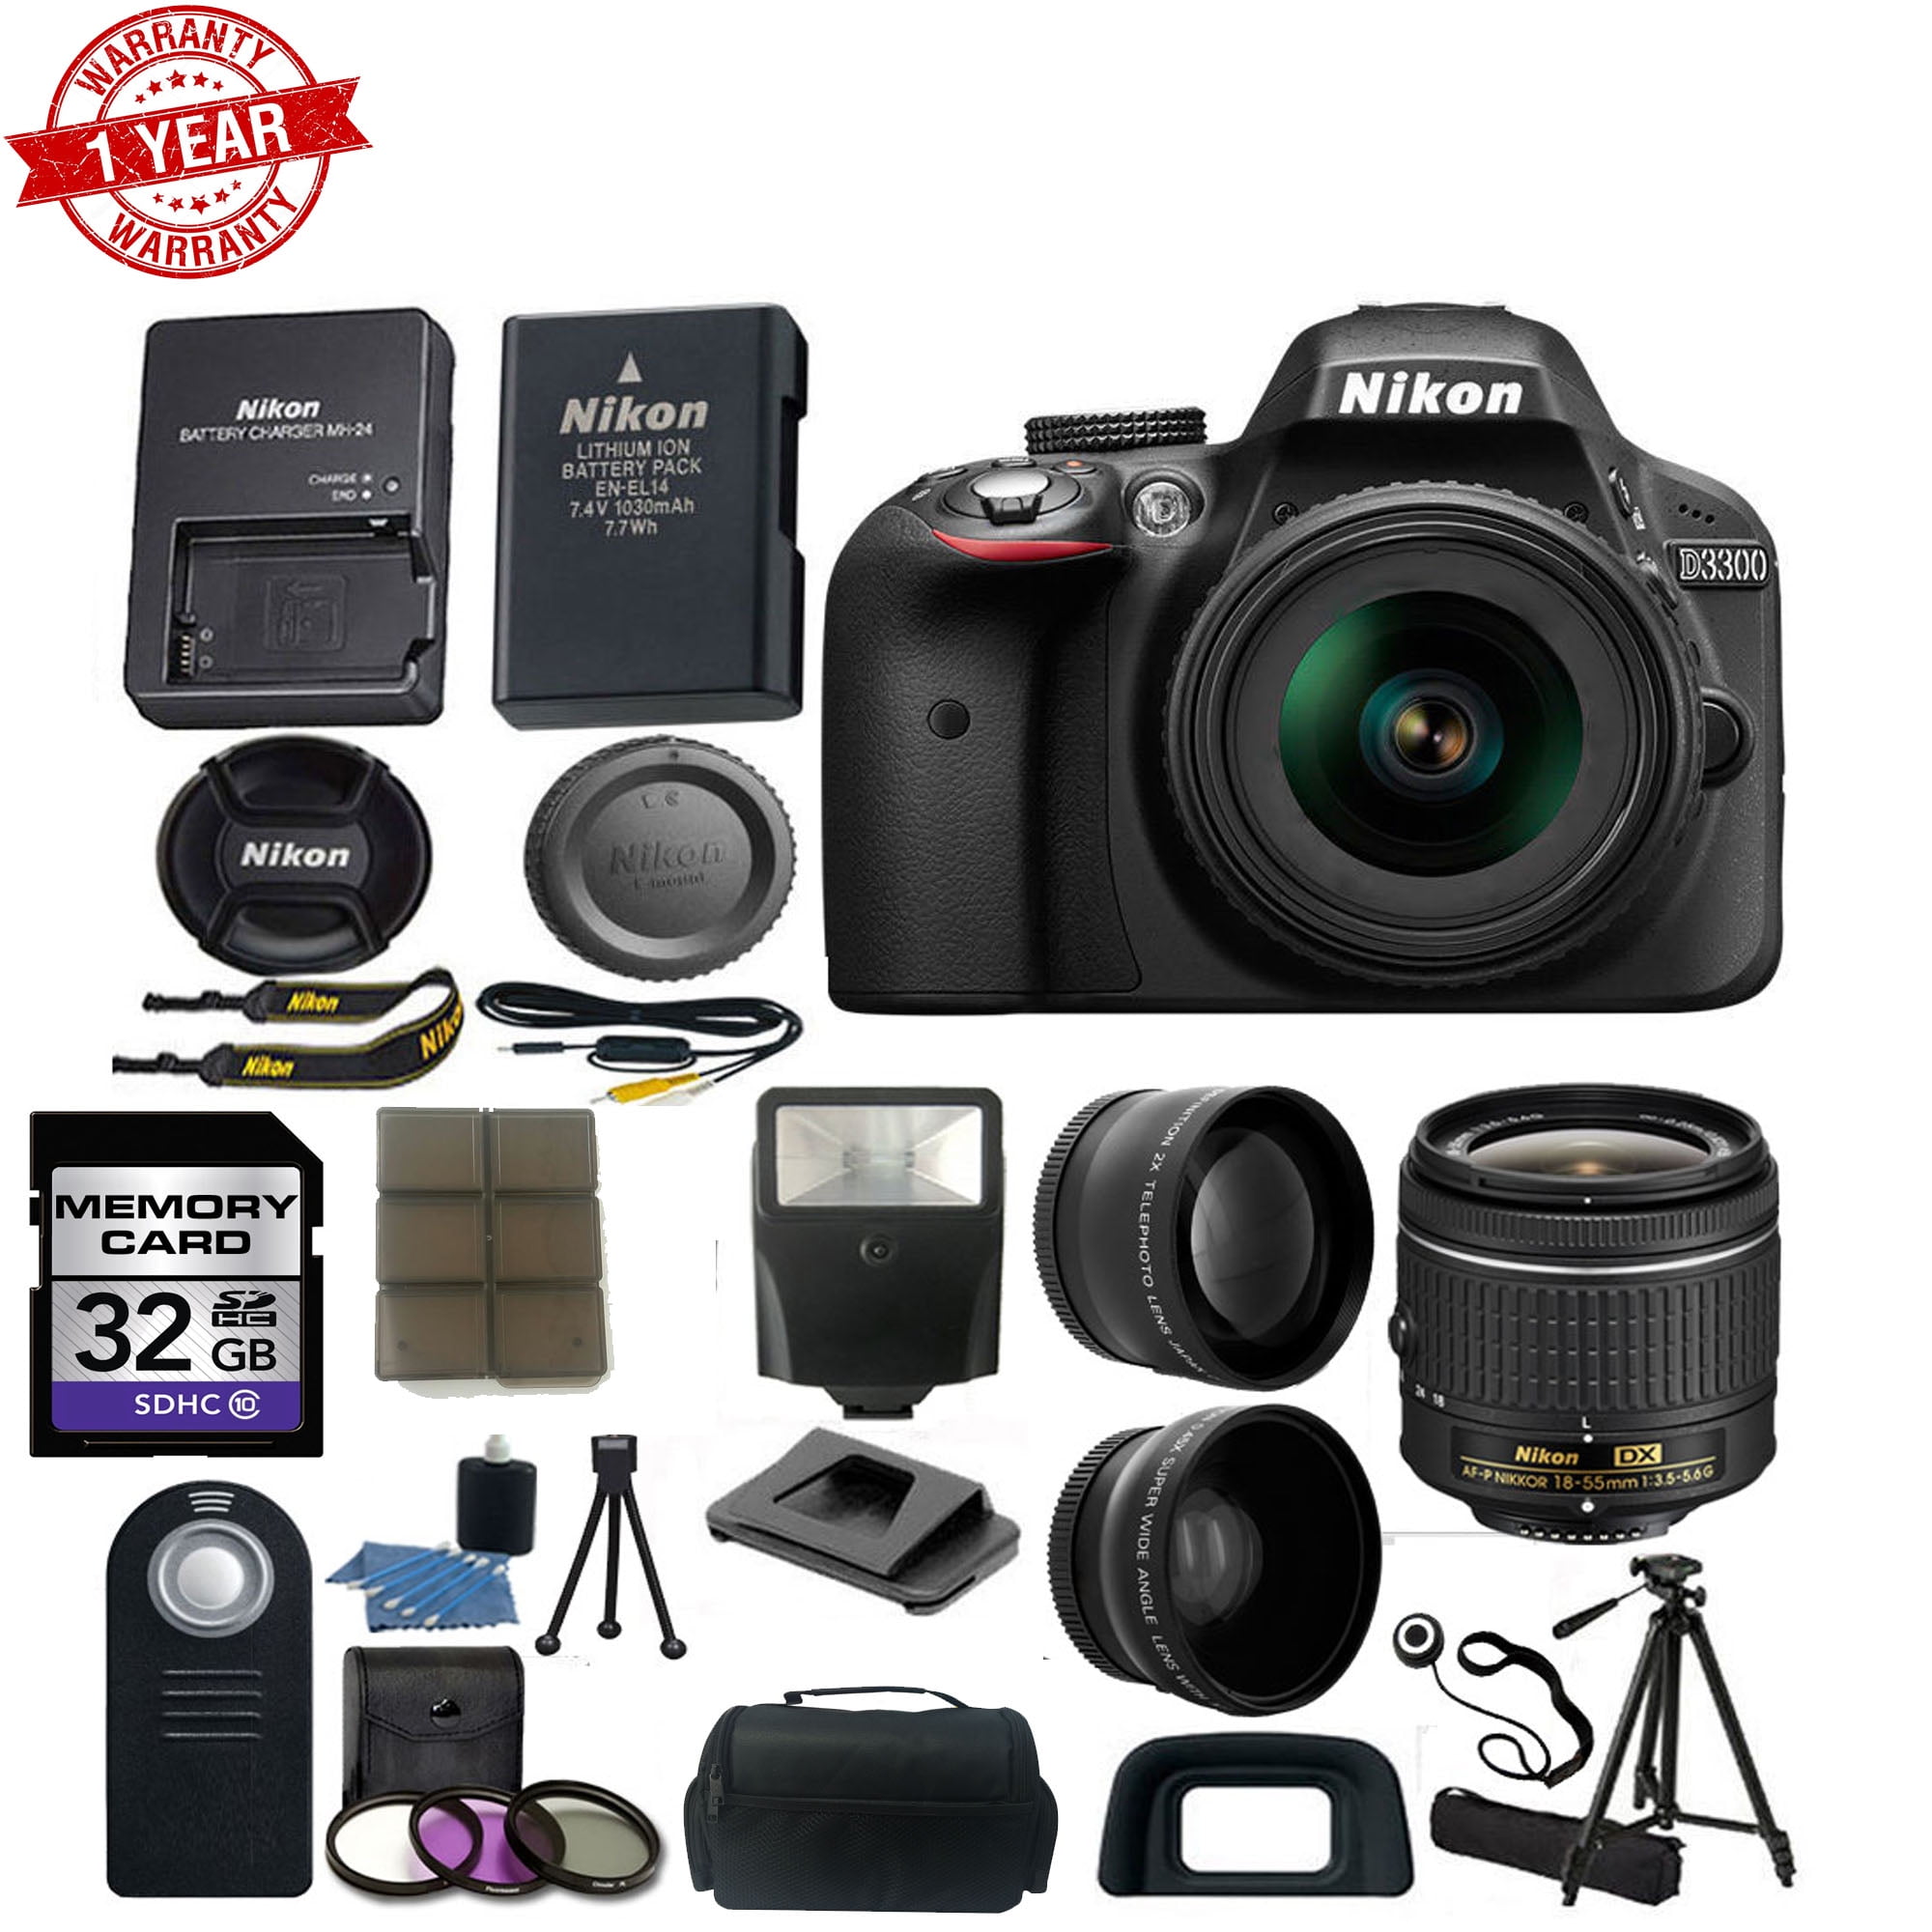  Nikon D3500 24.2MP DSLR Digital Camera with 18-55mm and  70-300mm Lenses (1588) Deluxe Bundle -Includes- Sandisk 64GB SD Card +  Large Camera Bag + Filter Kit + Spare Battery + Telephoto Lens : Electronics